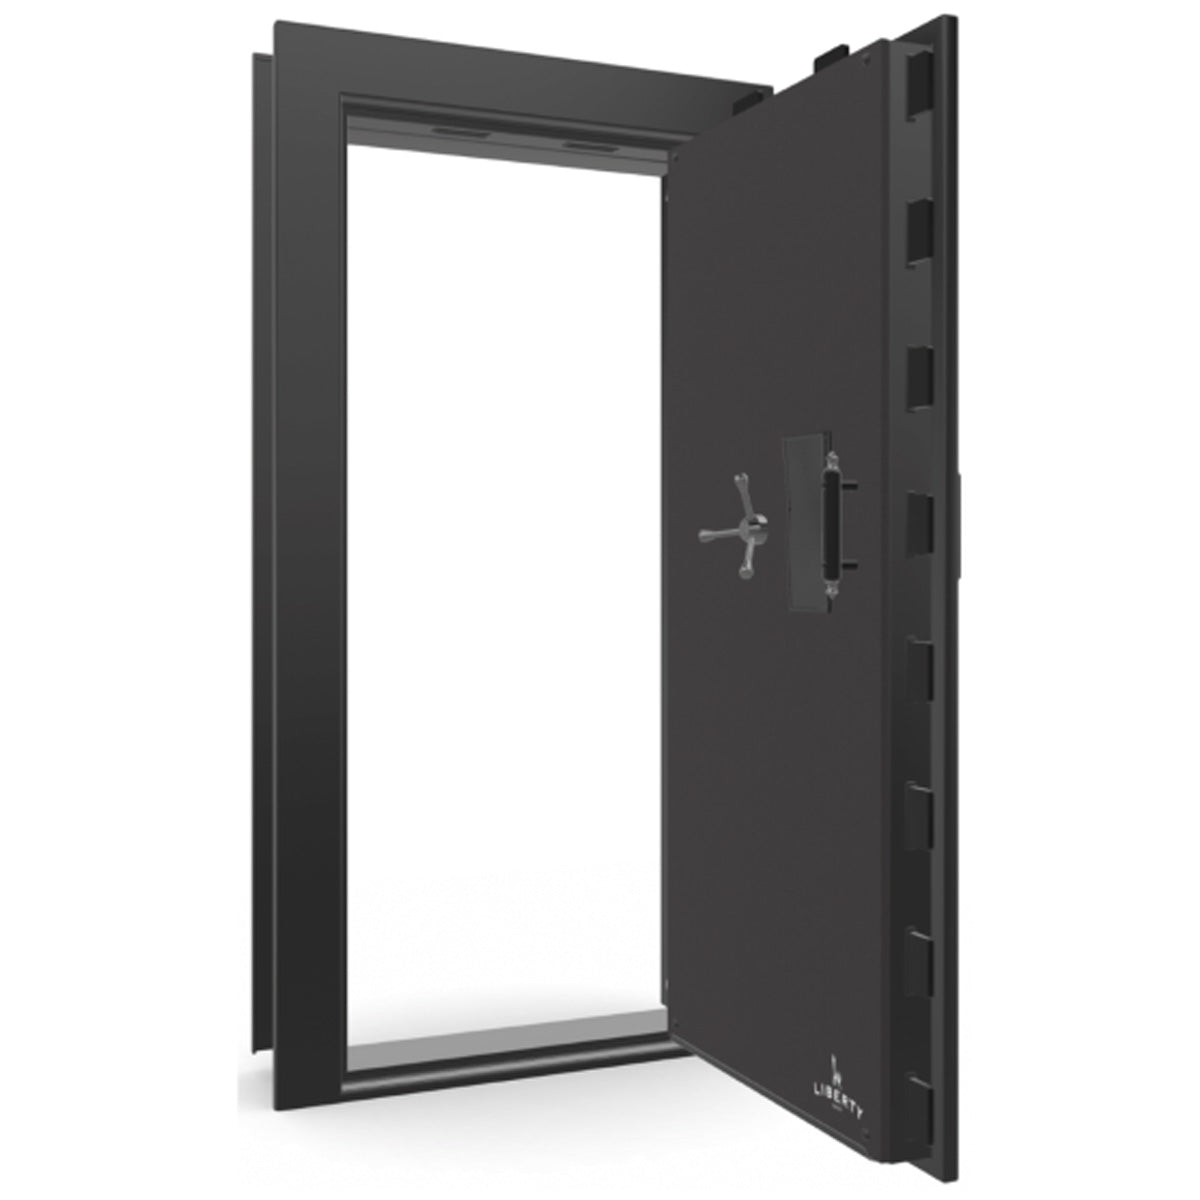 The Beast Vault Door in Black Gloss with Black Chrome Electronic Lock, Right Outswing, door open.